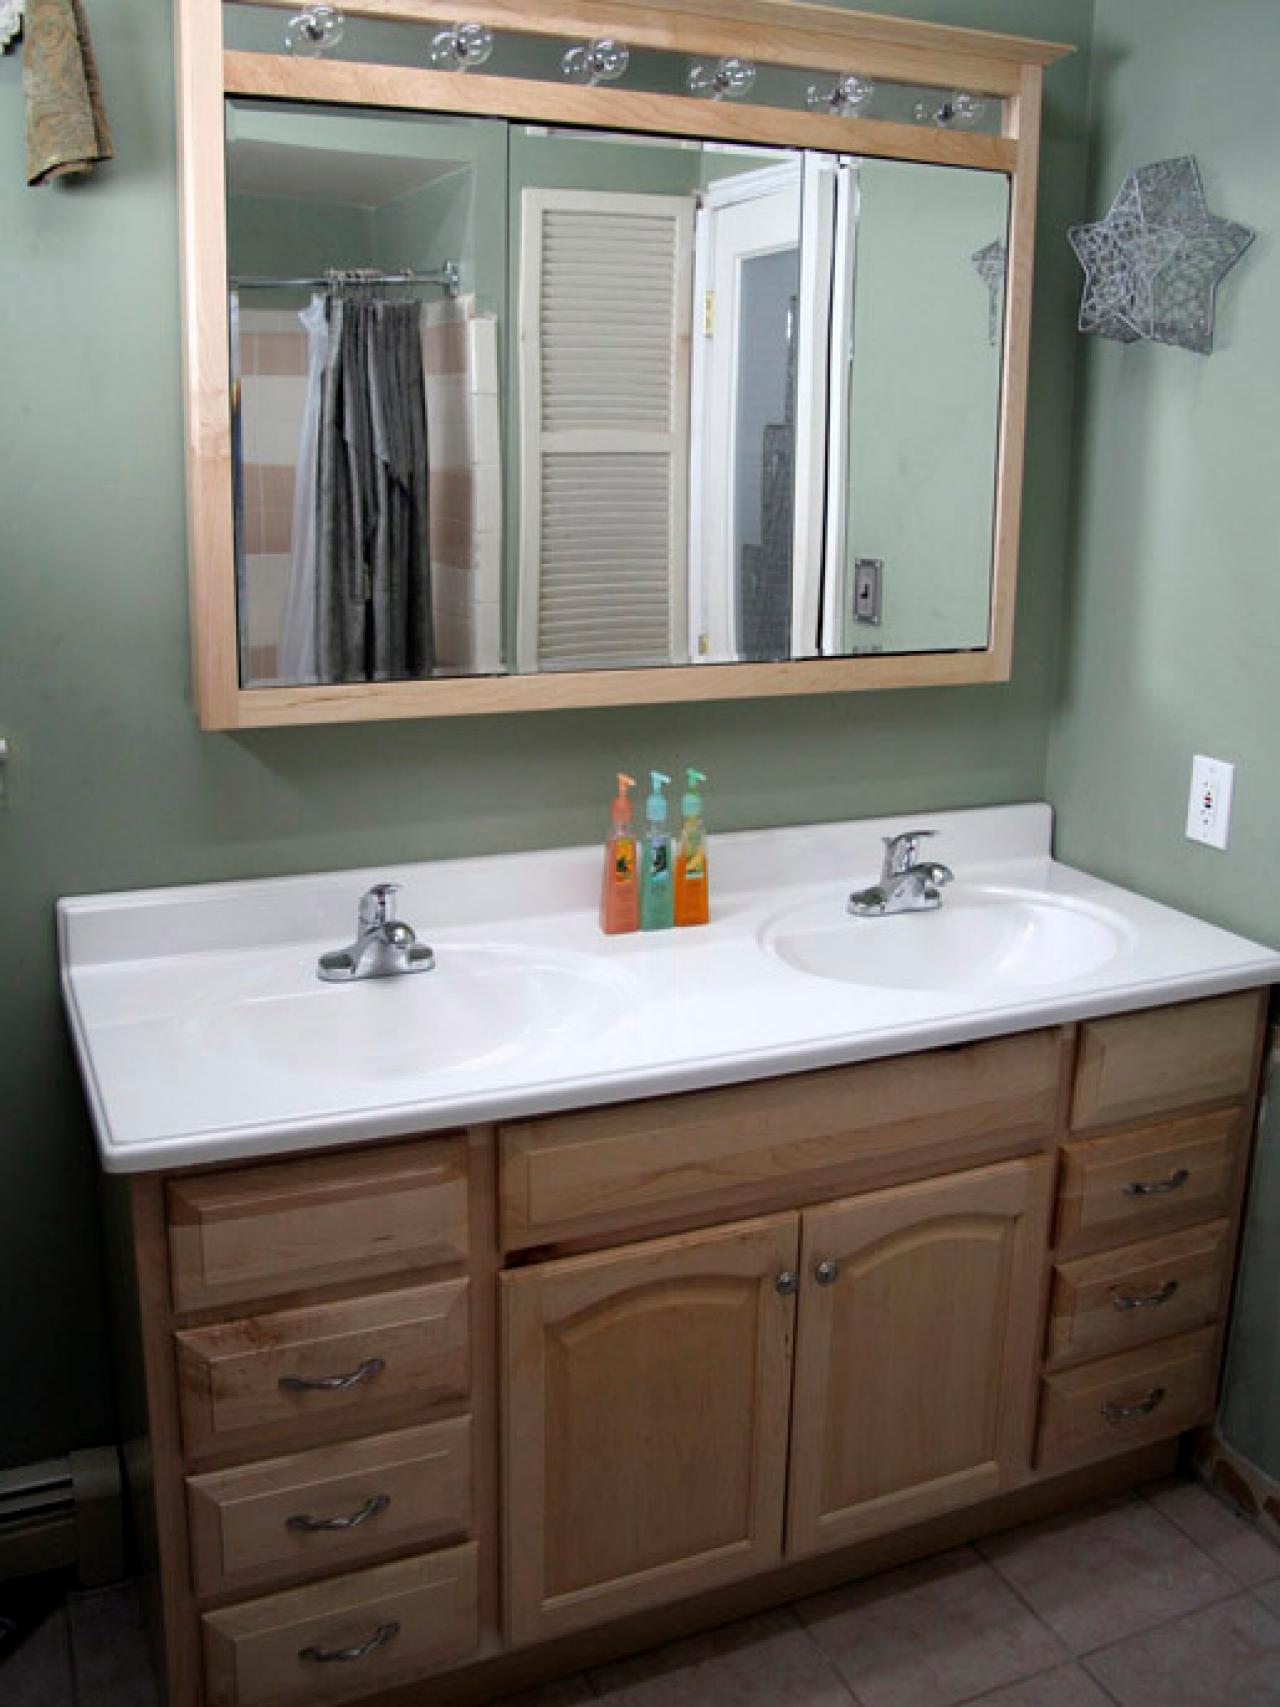 Installing A Bathroom Vanity, How To Remove And Replace A Bathroom Vanity